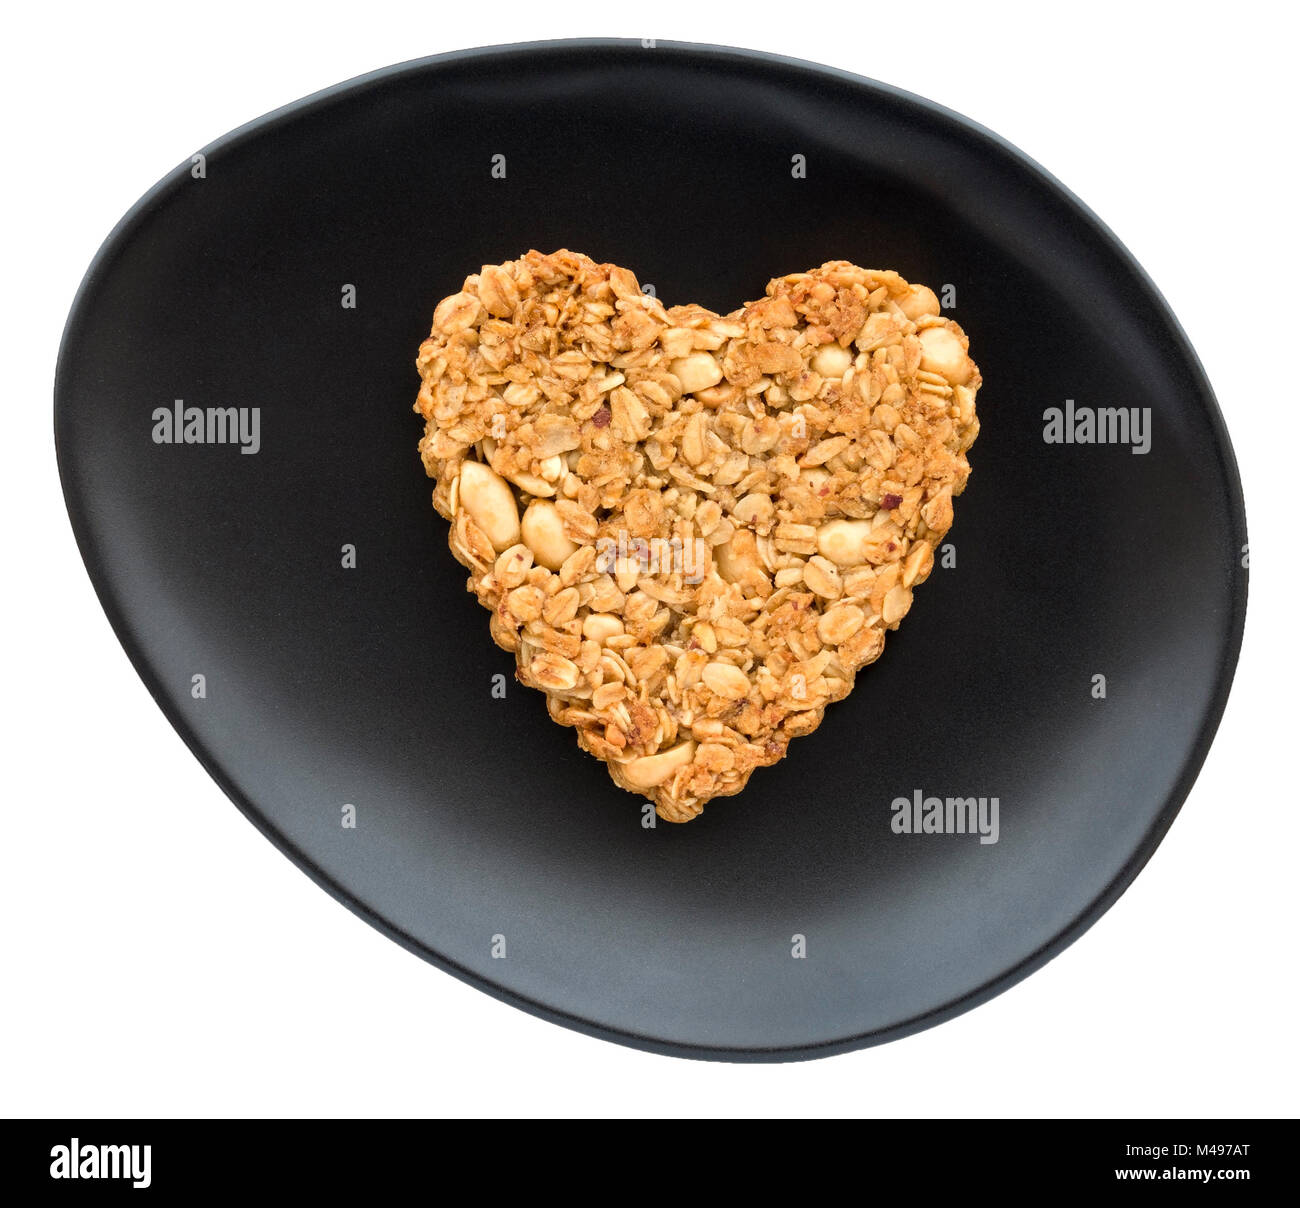 One home-baked heart shaped peanut and oat flapjack biscuit made for Valentines day on oval black plate and white background. Stock Photo